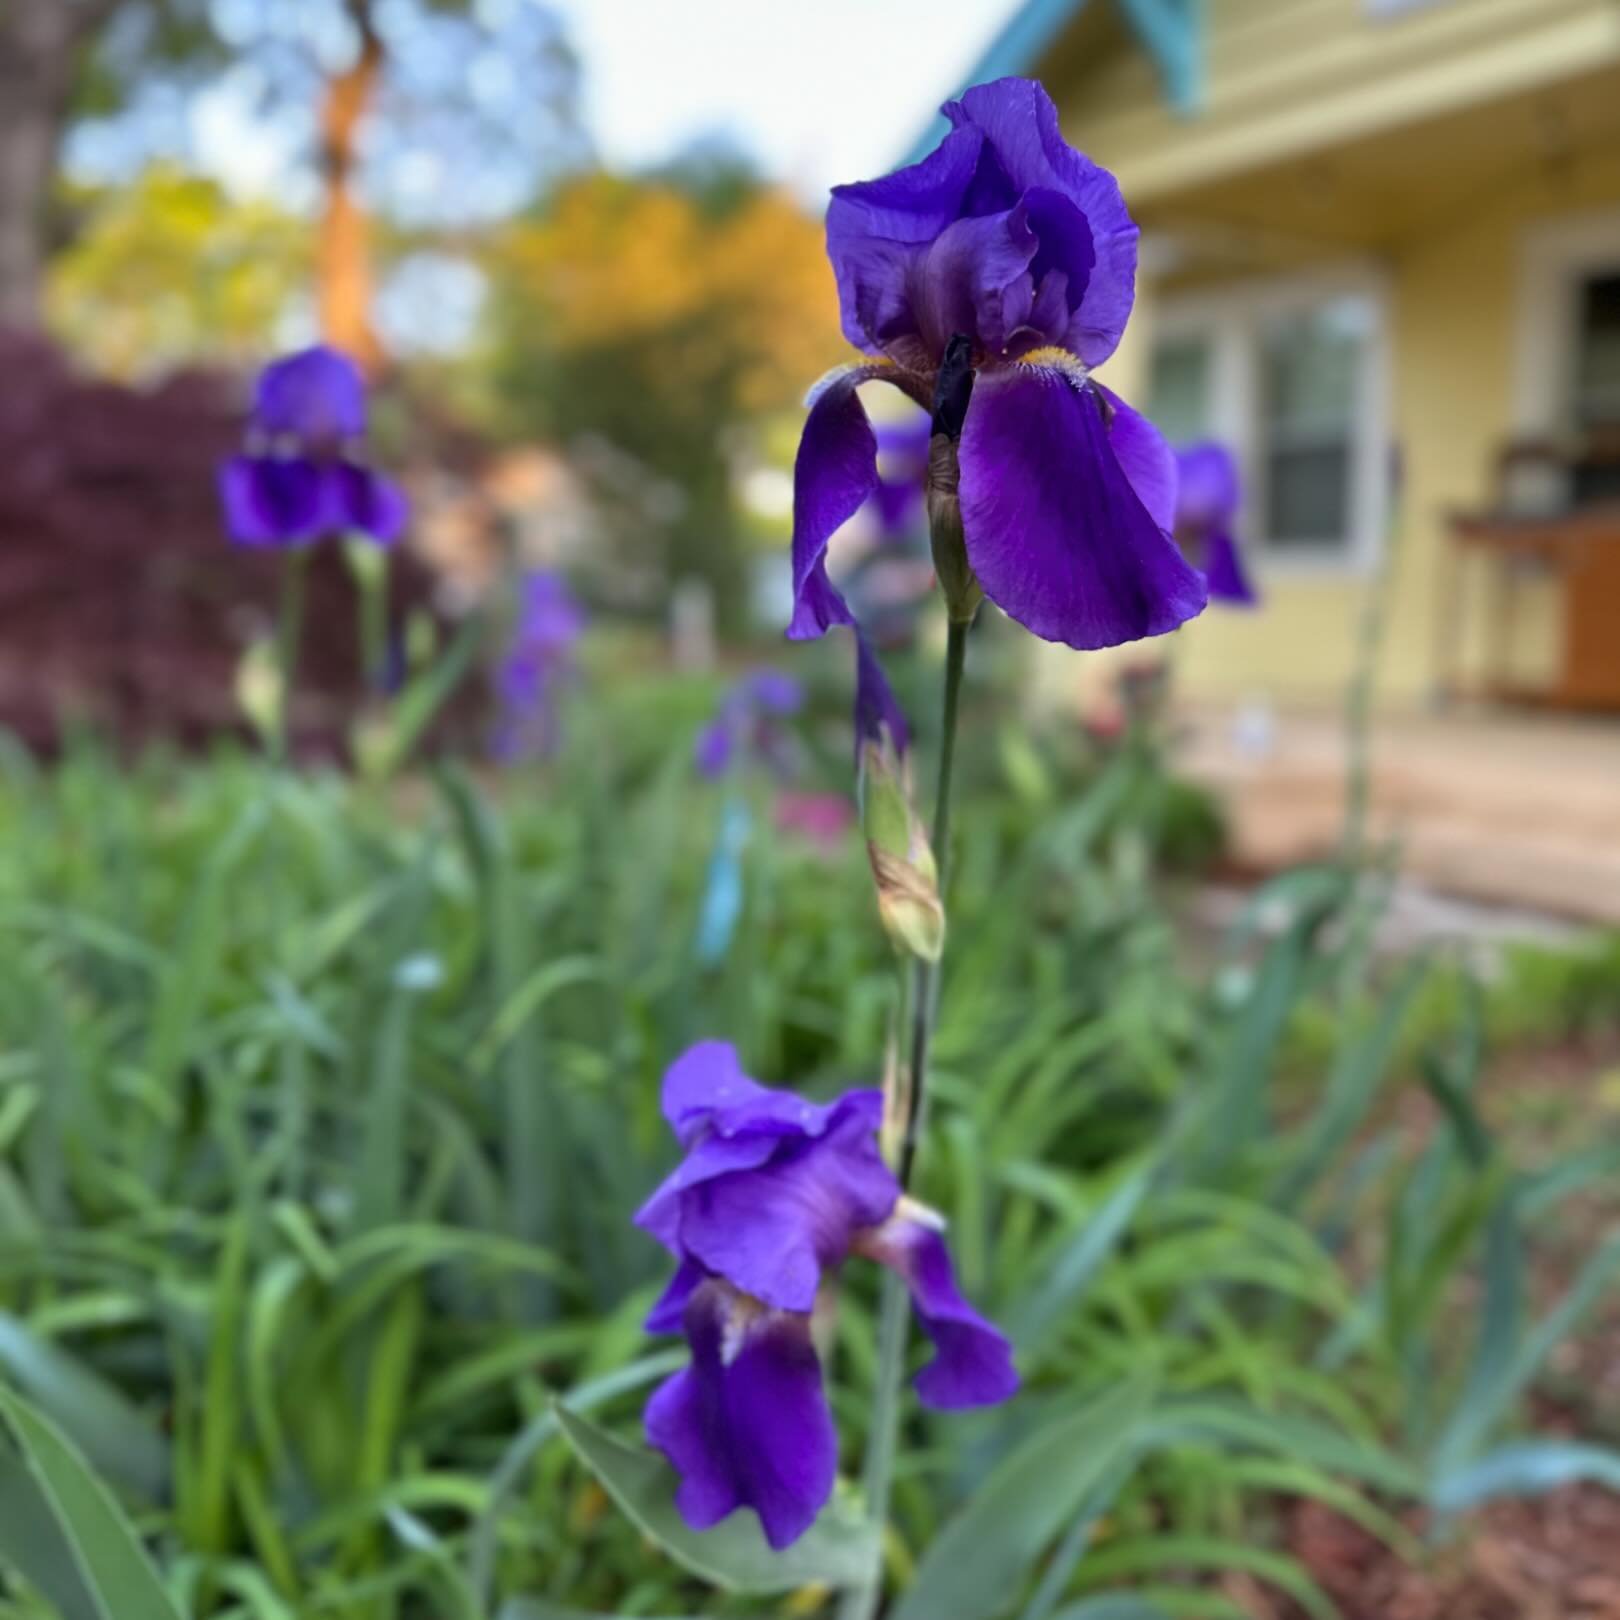 Happy Friday neighbors!  You made it through the week. It&rsquo;s a gorgeous day in #Villaheights &mdash; enjoy the beautiful weather this weekend. 

💐